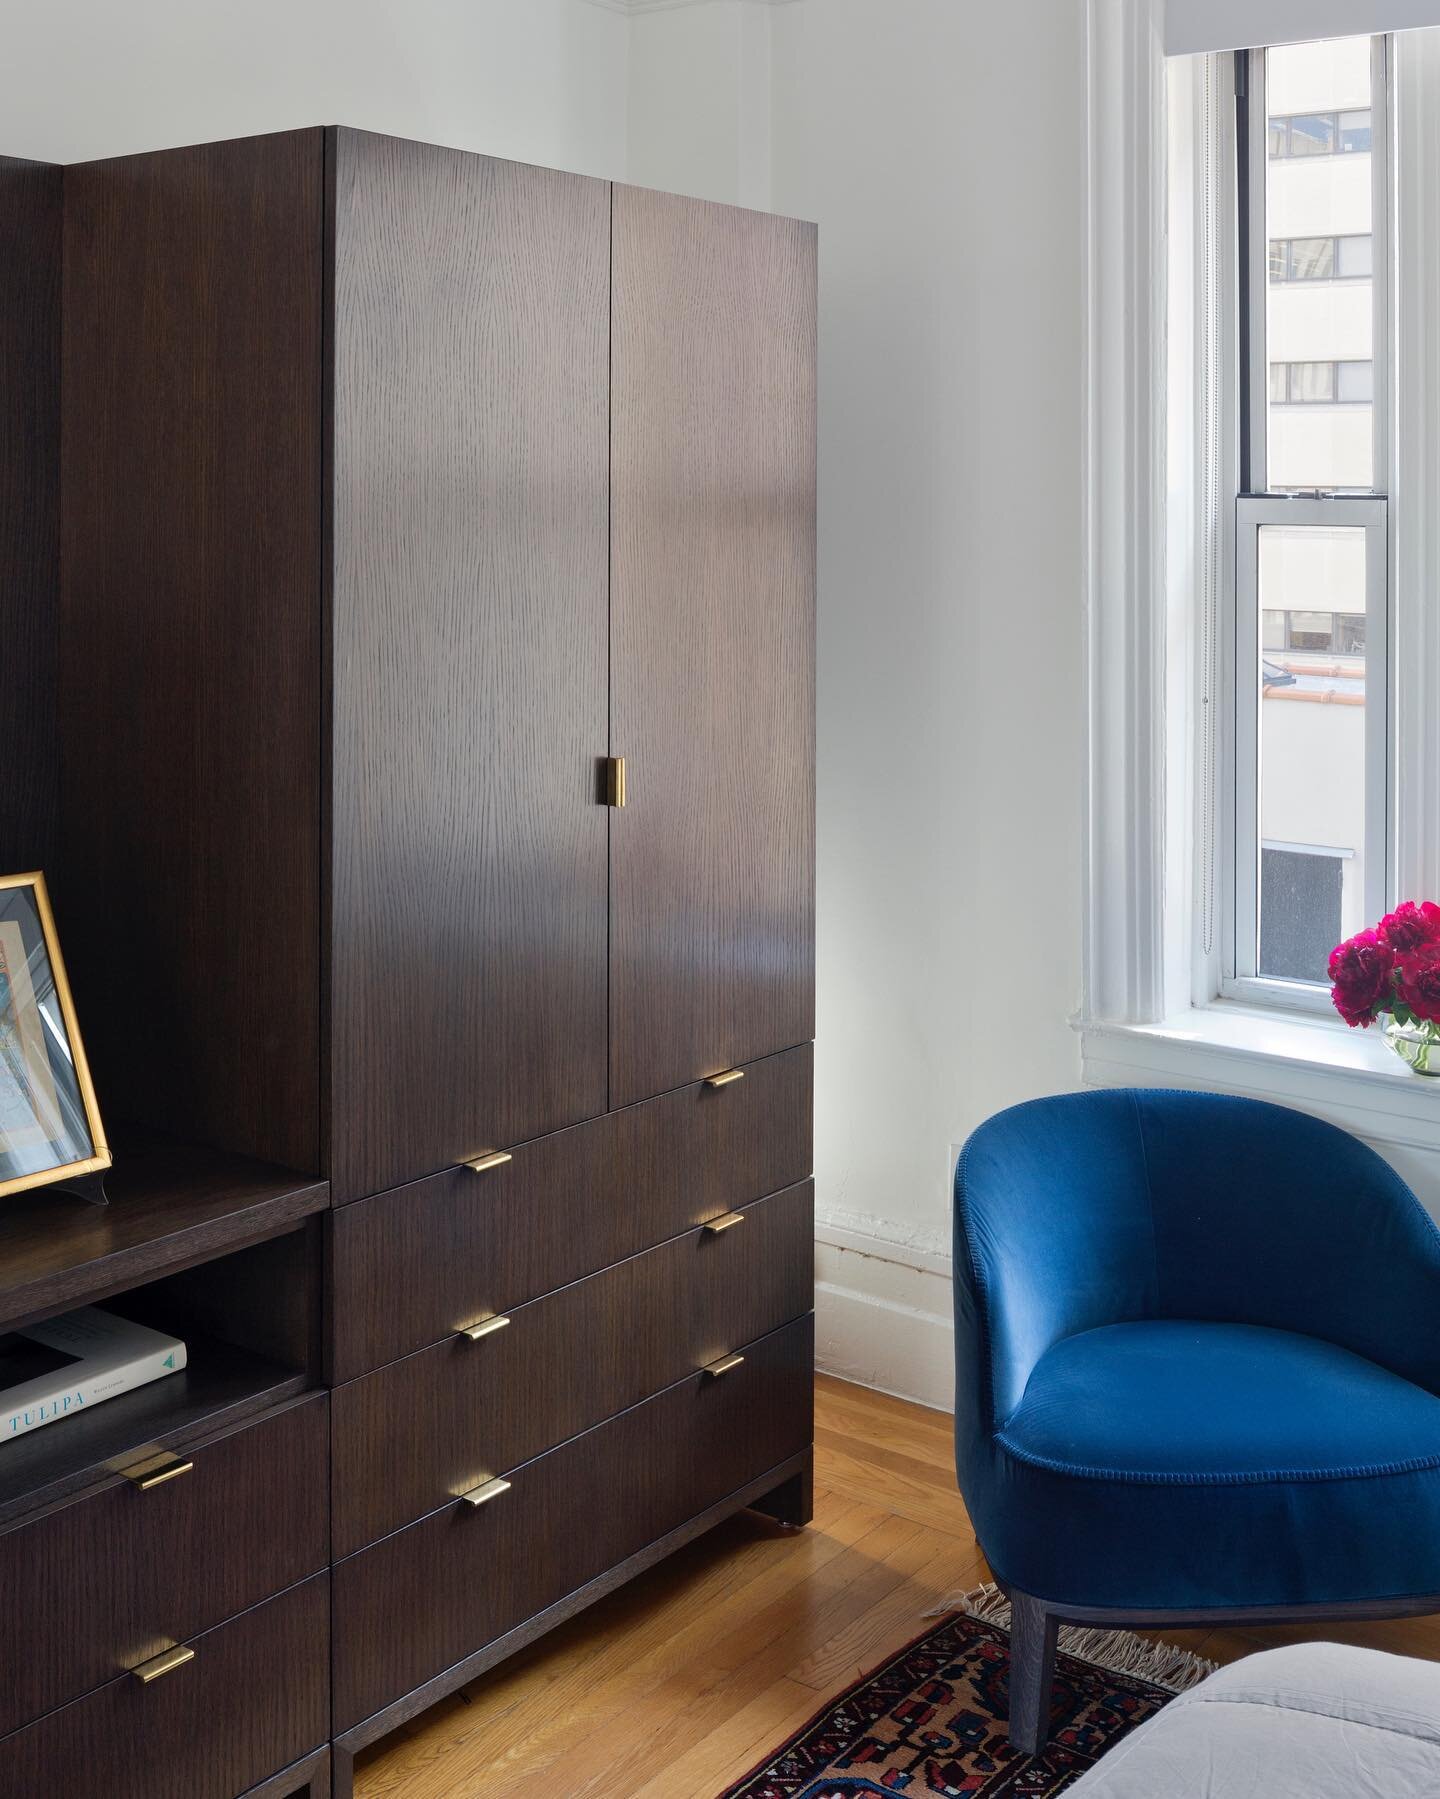 TRANSFORMATION: Who doesn't love a peaceful corner for reading and relaxing? Our custom armoire and the gorgeous Febo chair by @bebitalia make this bedroom feel extra luxurious! Photo: @paulriveraphotography